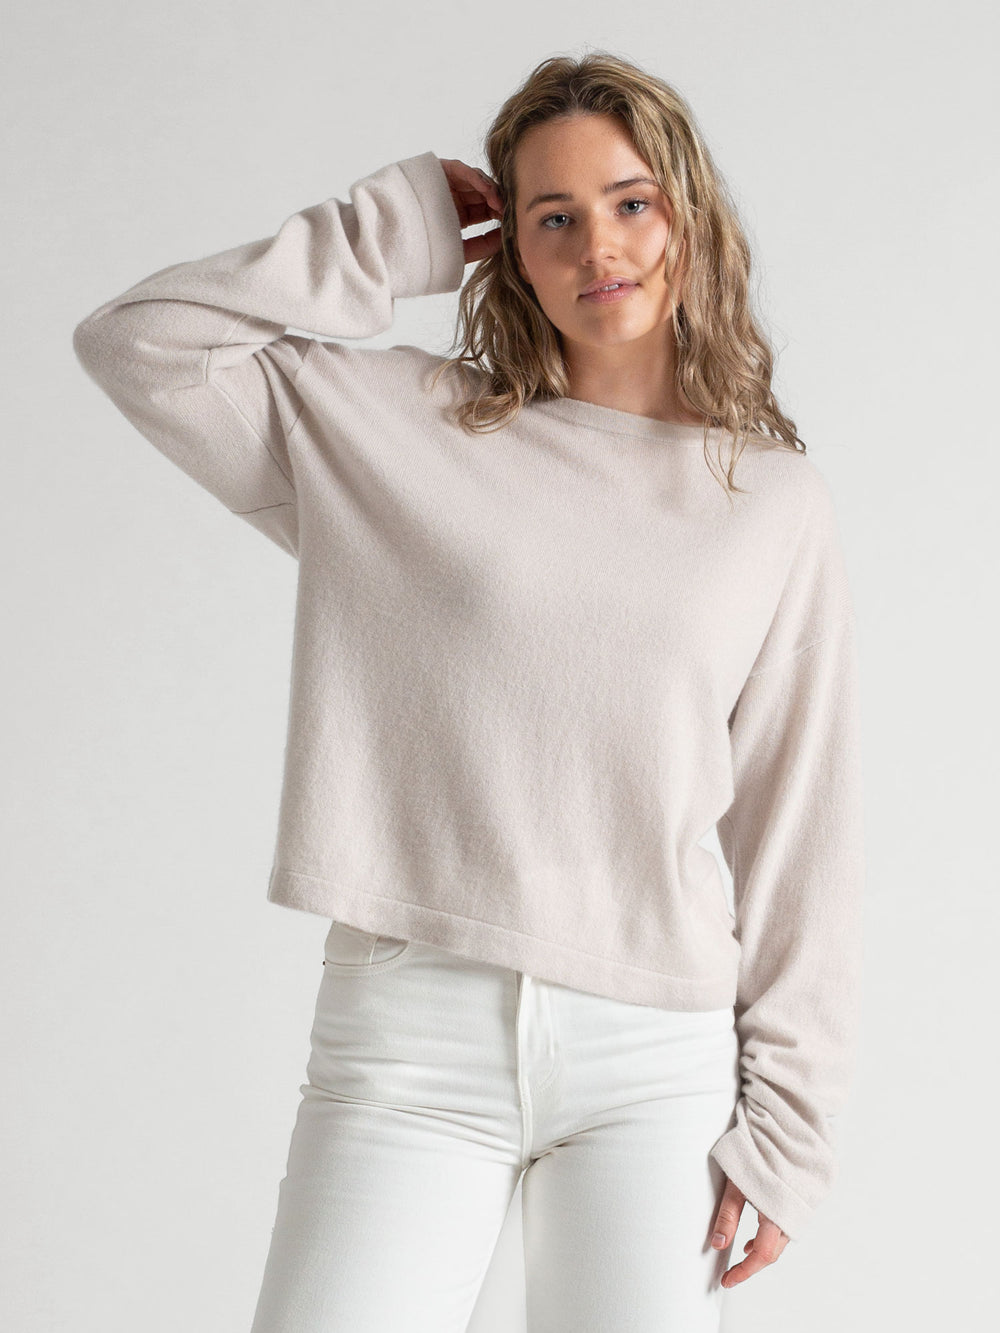 Wide neck cashmere sweater, in 100% pure cashmere. Scandinavian design by Kashmina. Color: Cold Creme.